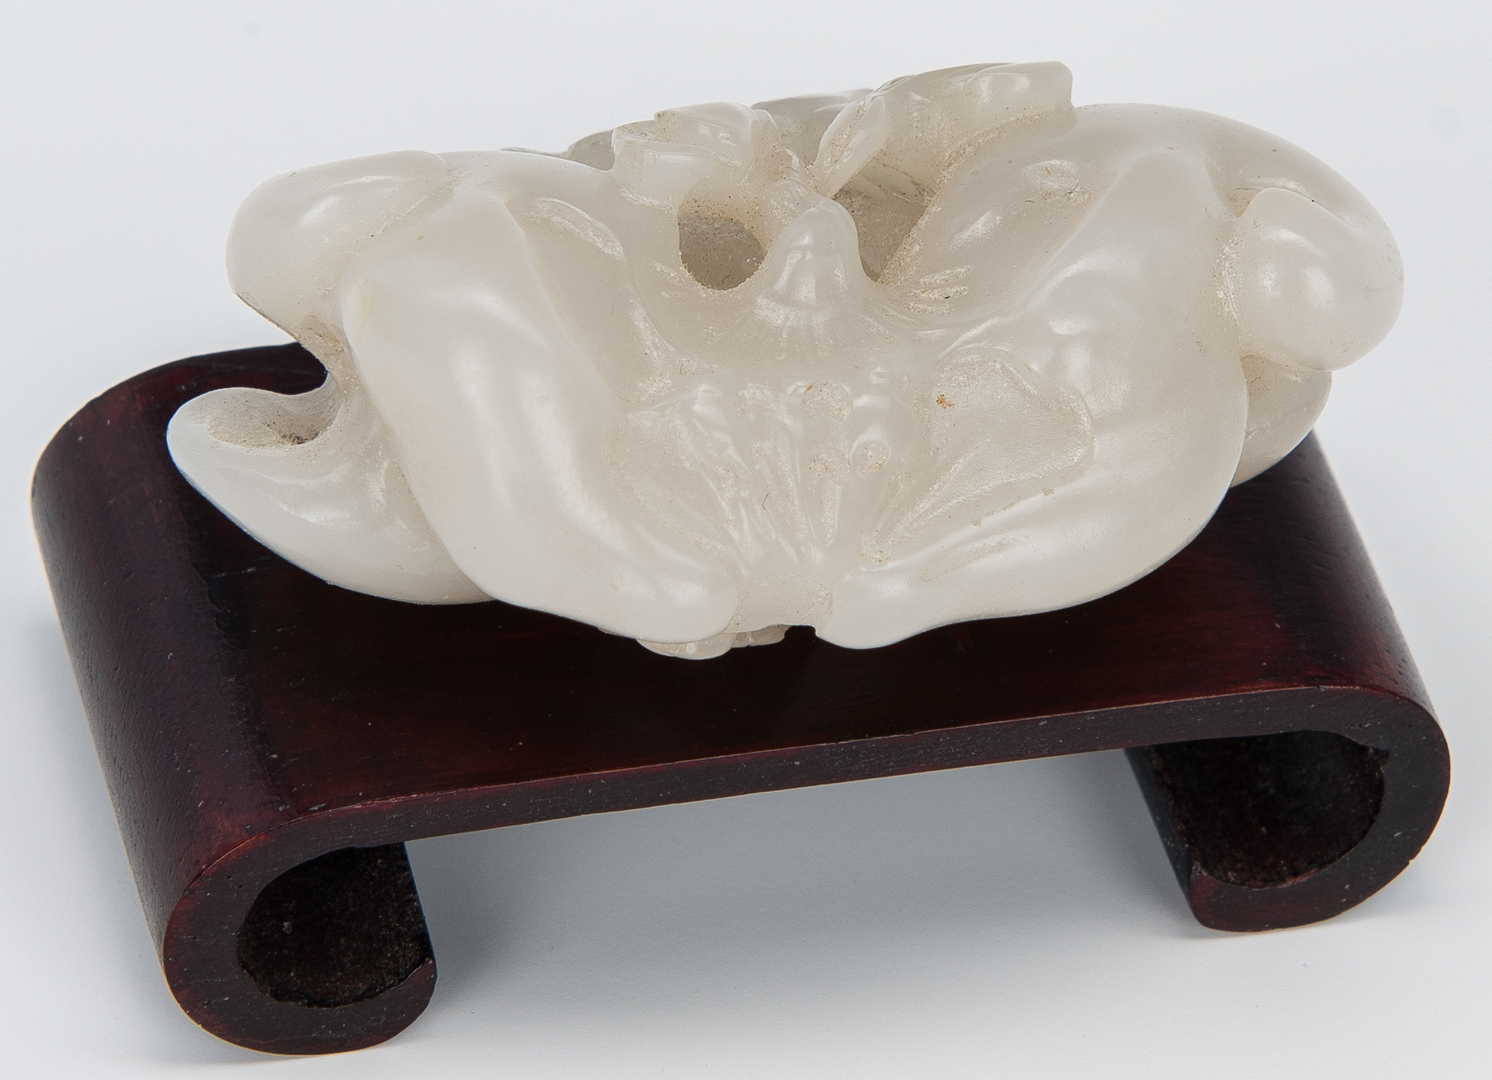 Lot 323: 4 Chinese Carved Jade Items